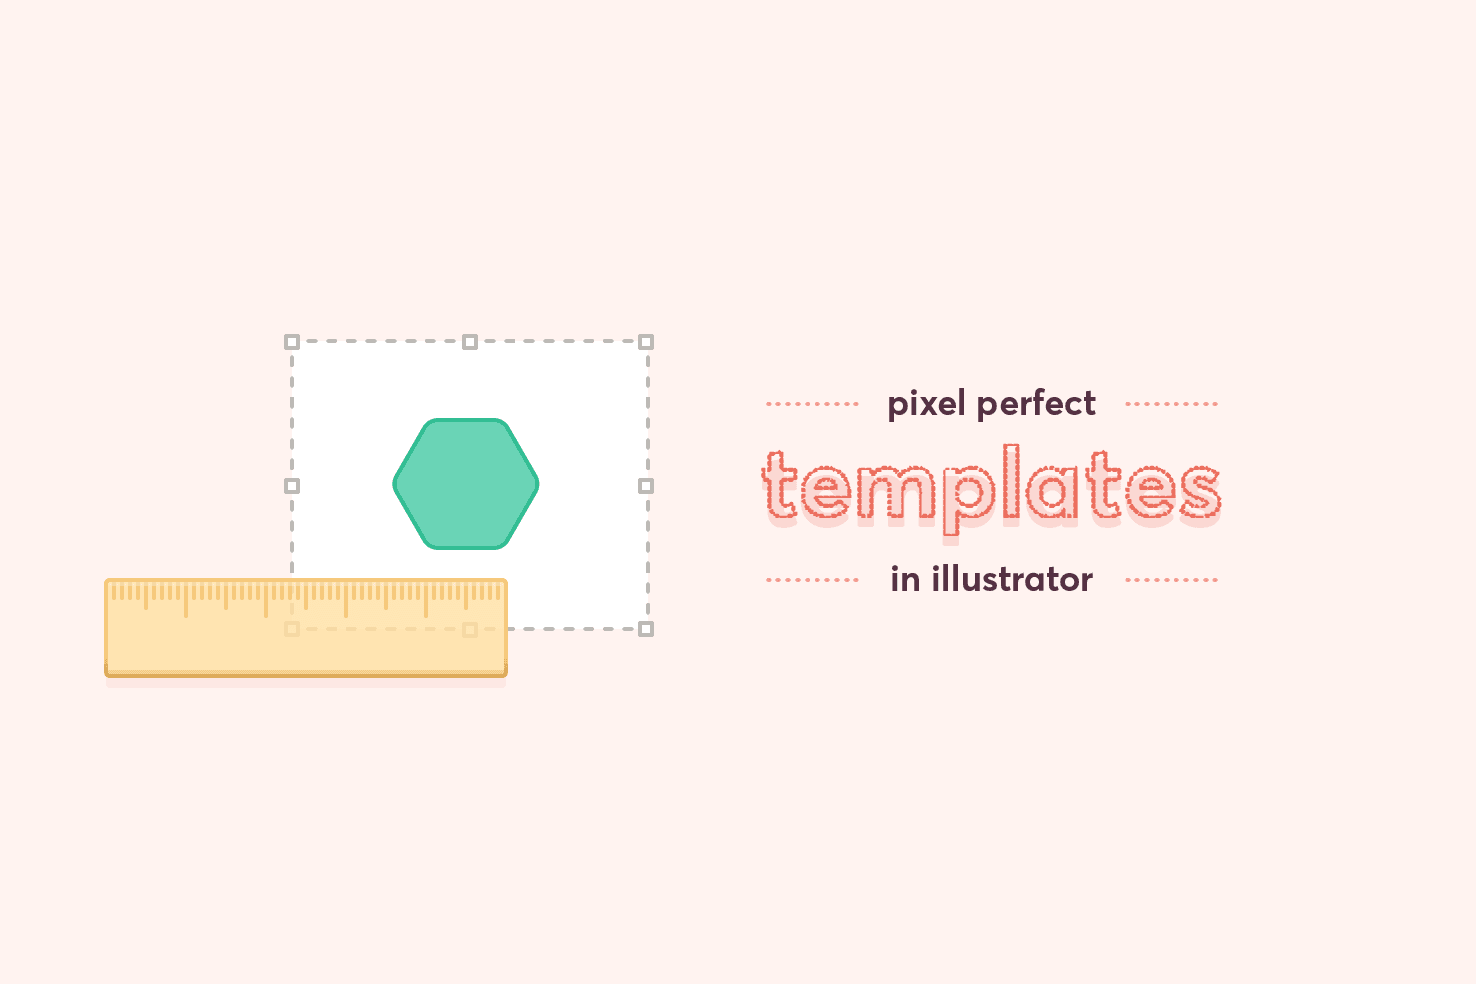 Pixel perfect templates in Illustrator (featured image)